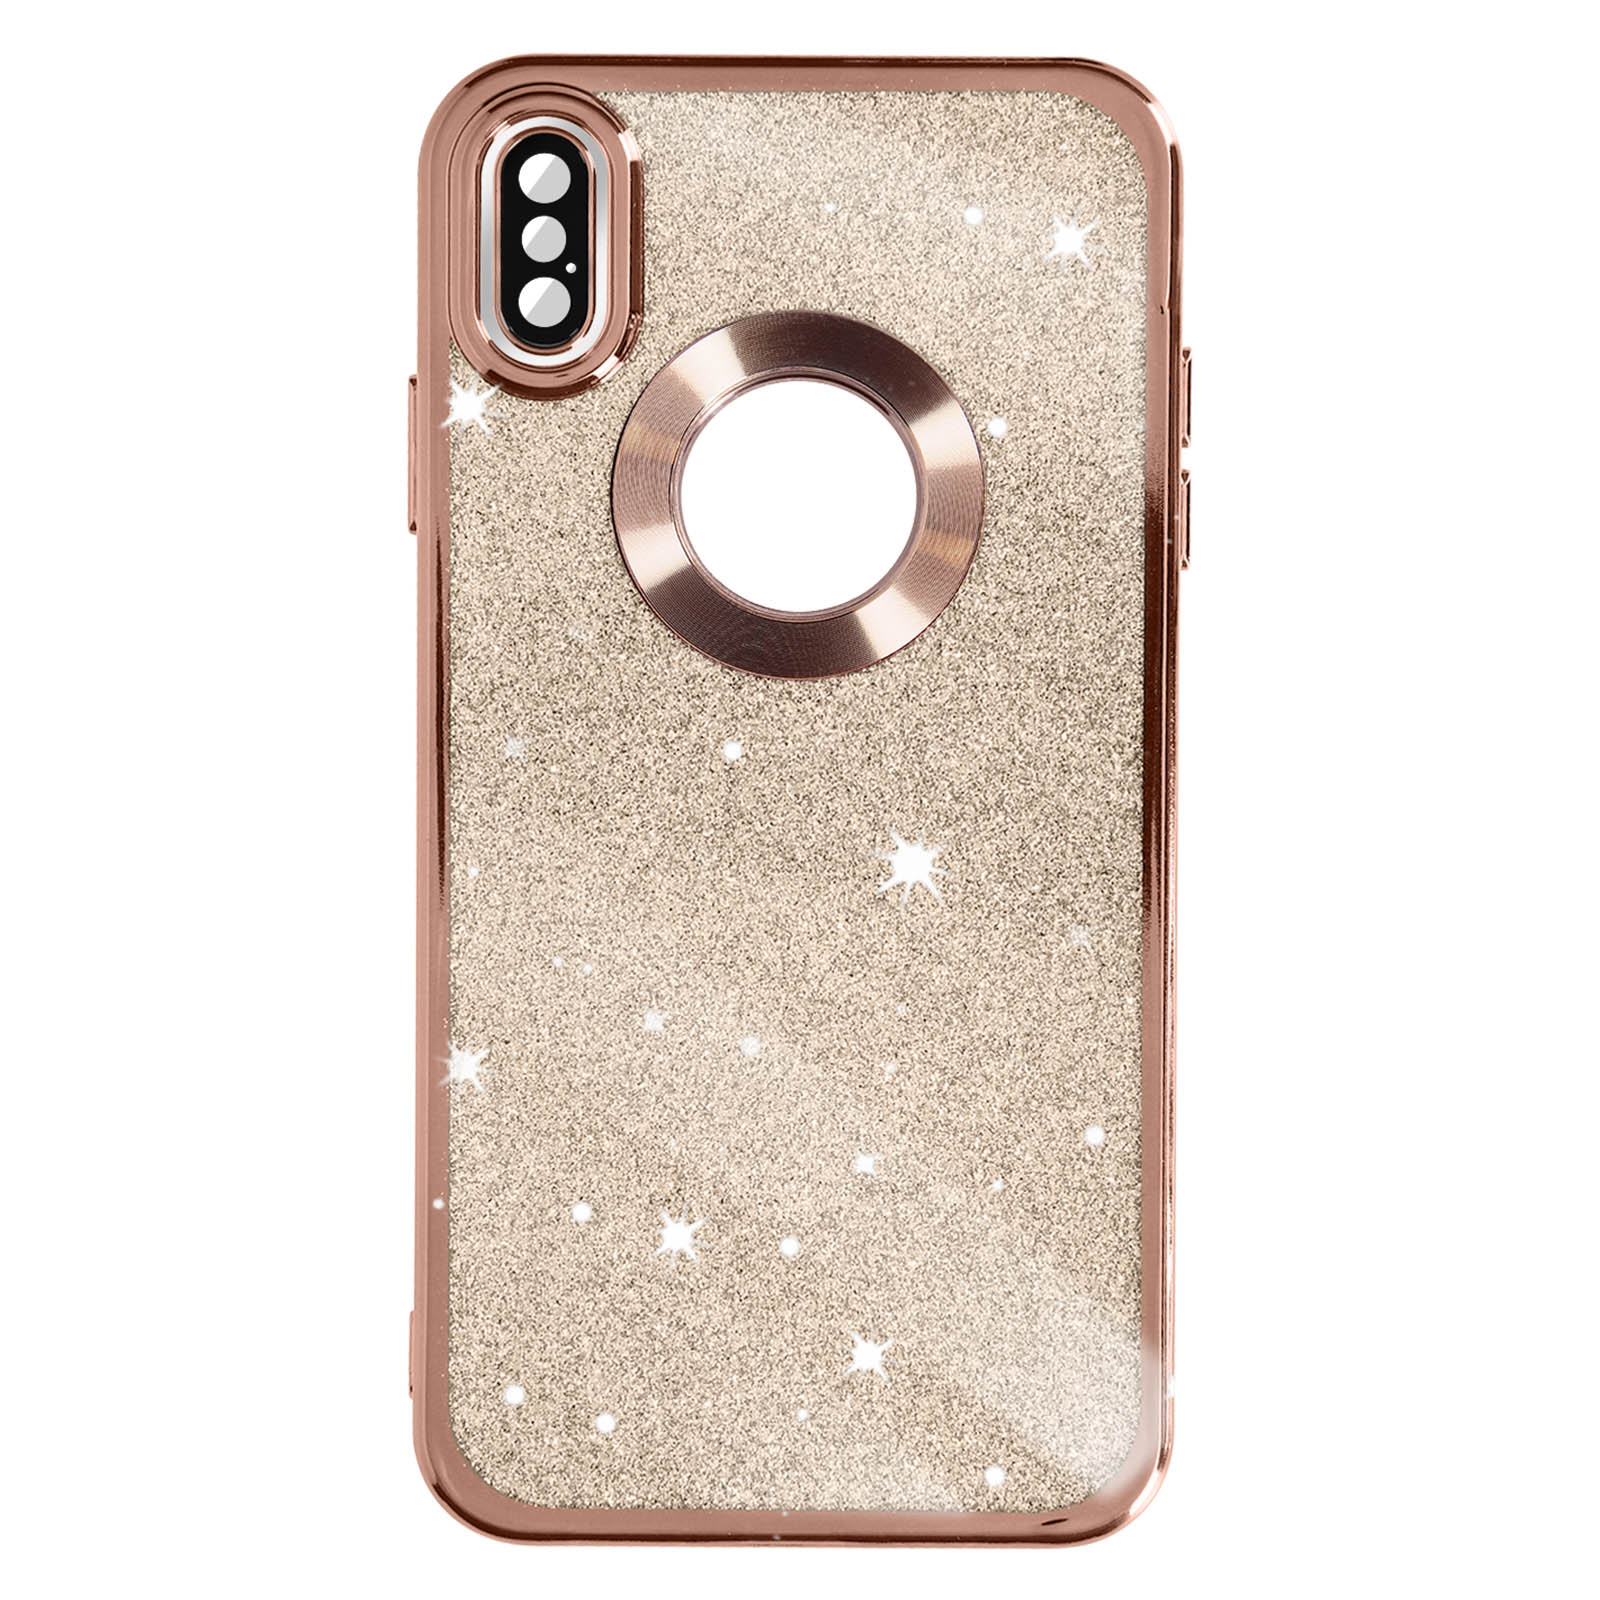 Spark Series, Rosegold Backcover, XS Max, Protecam AVIZAR iPhone Apple,